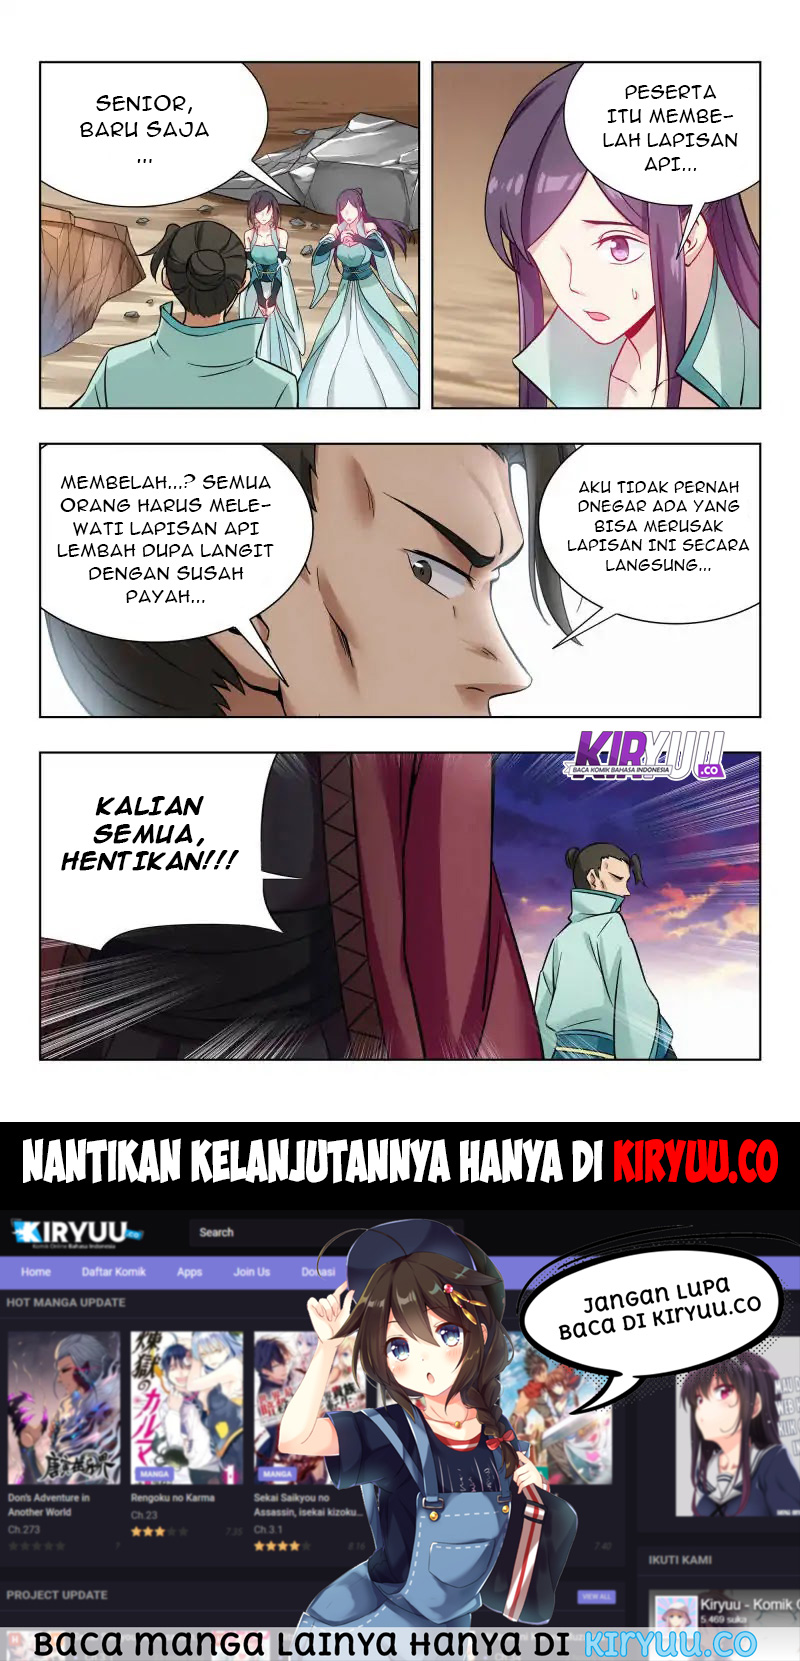 Strongest Anti M.E.T.A. Chapter 46